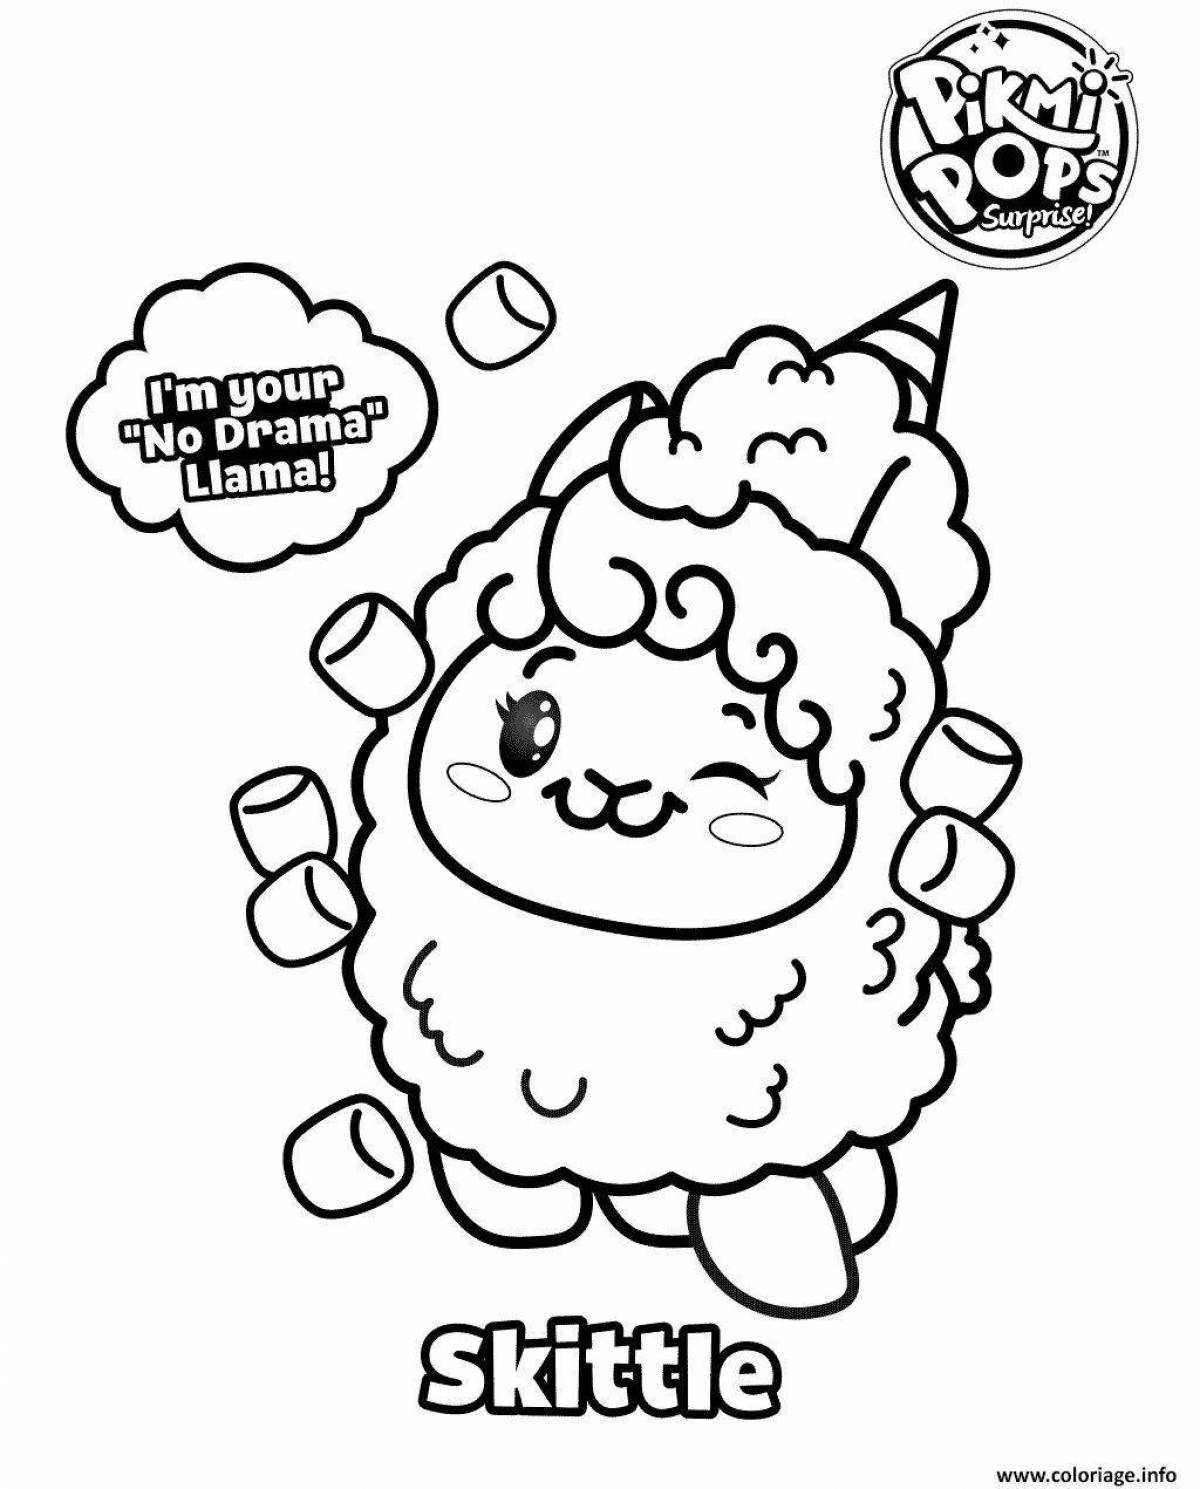 Glowing pikmy pops coloring page